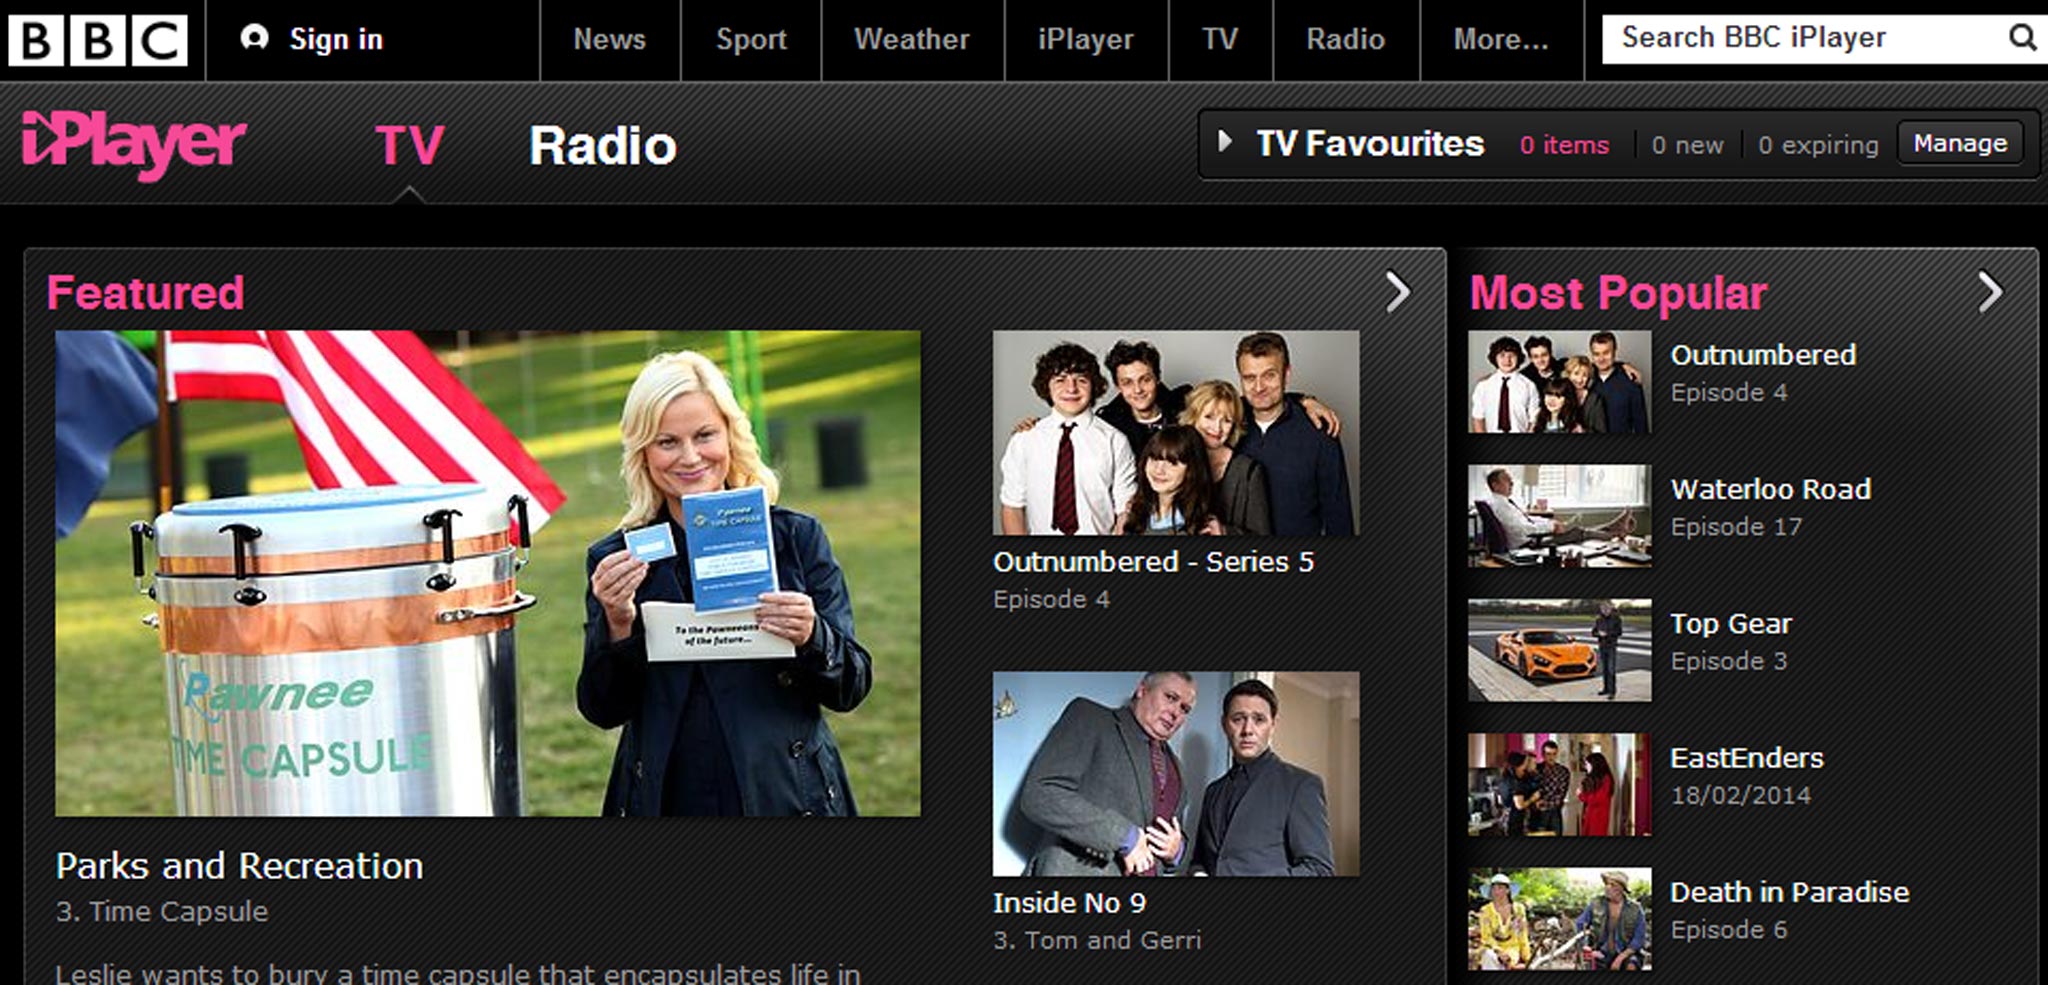 The BBC is upping its online-only content